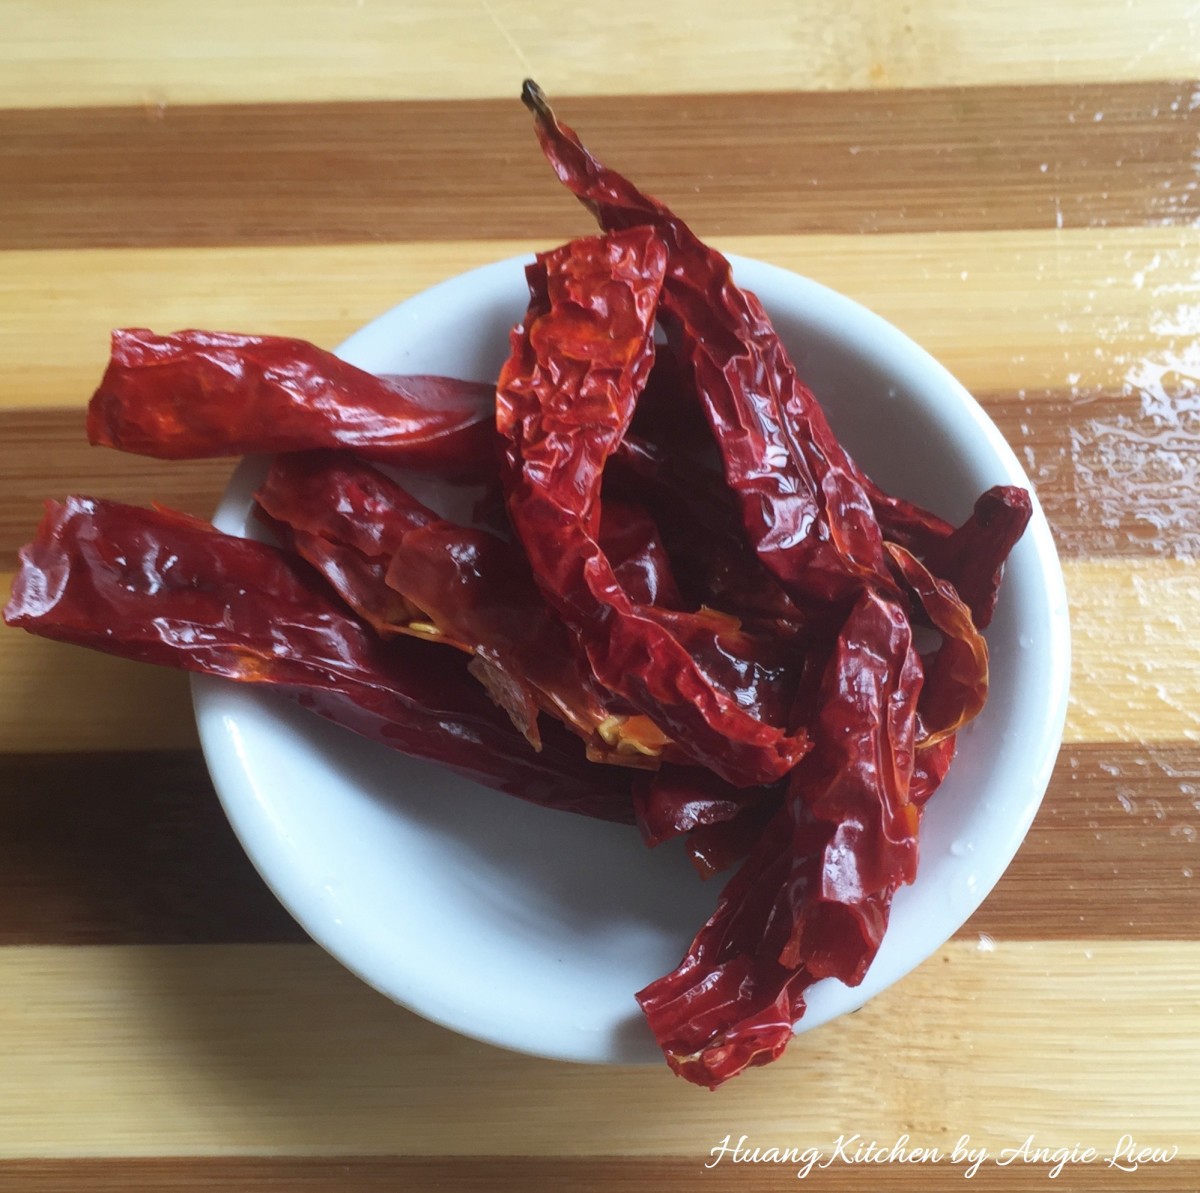 Spicy Sour Mustard Greens - soak deseed dried chillies